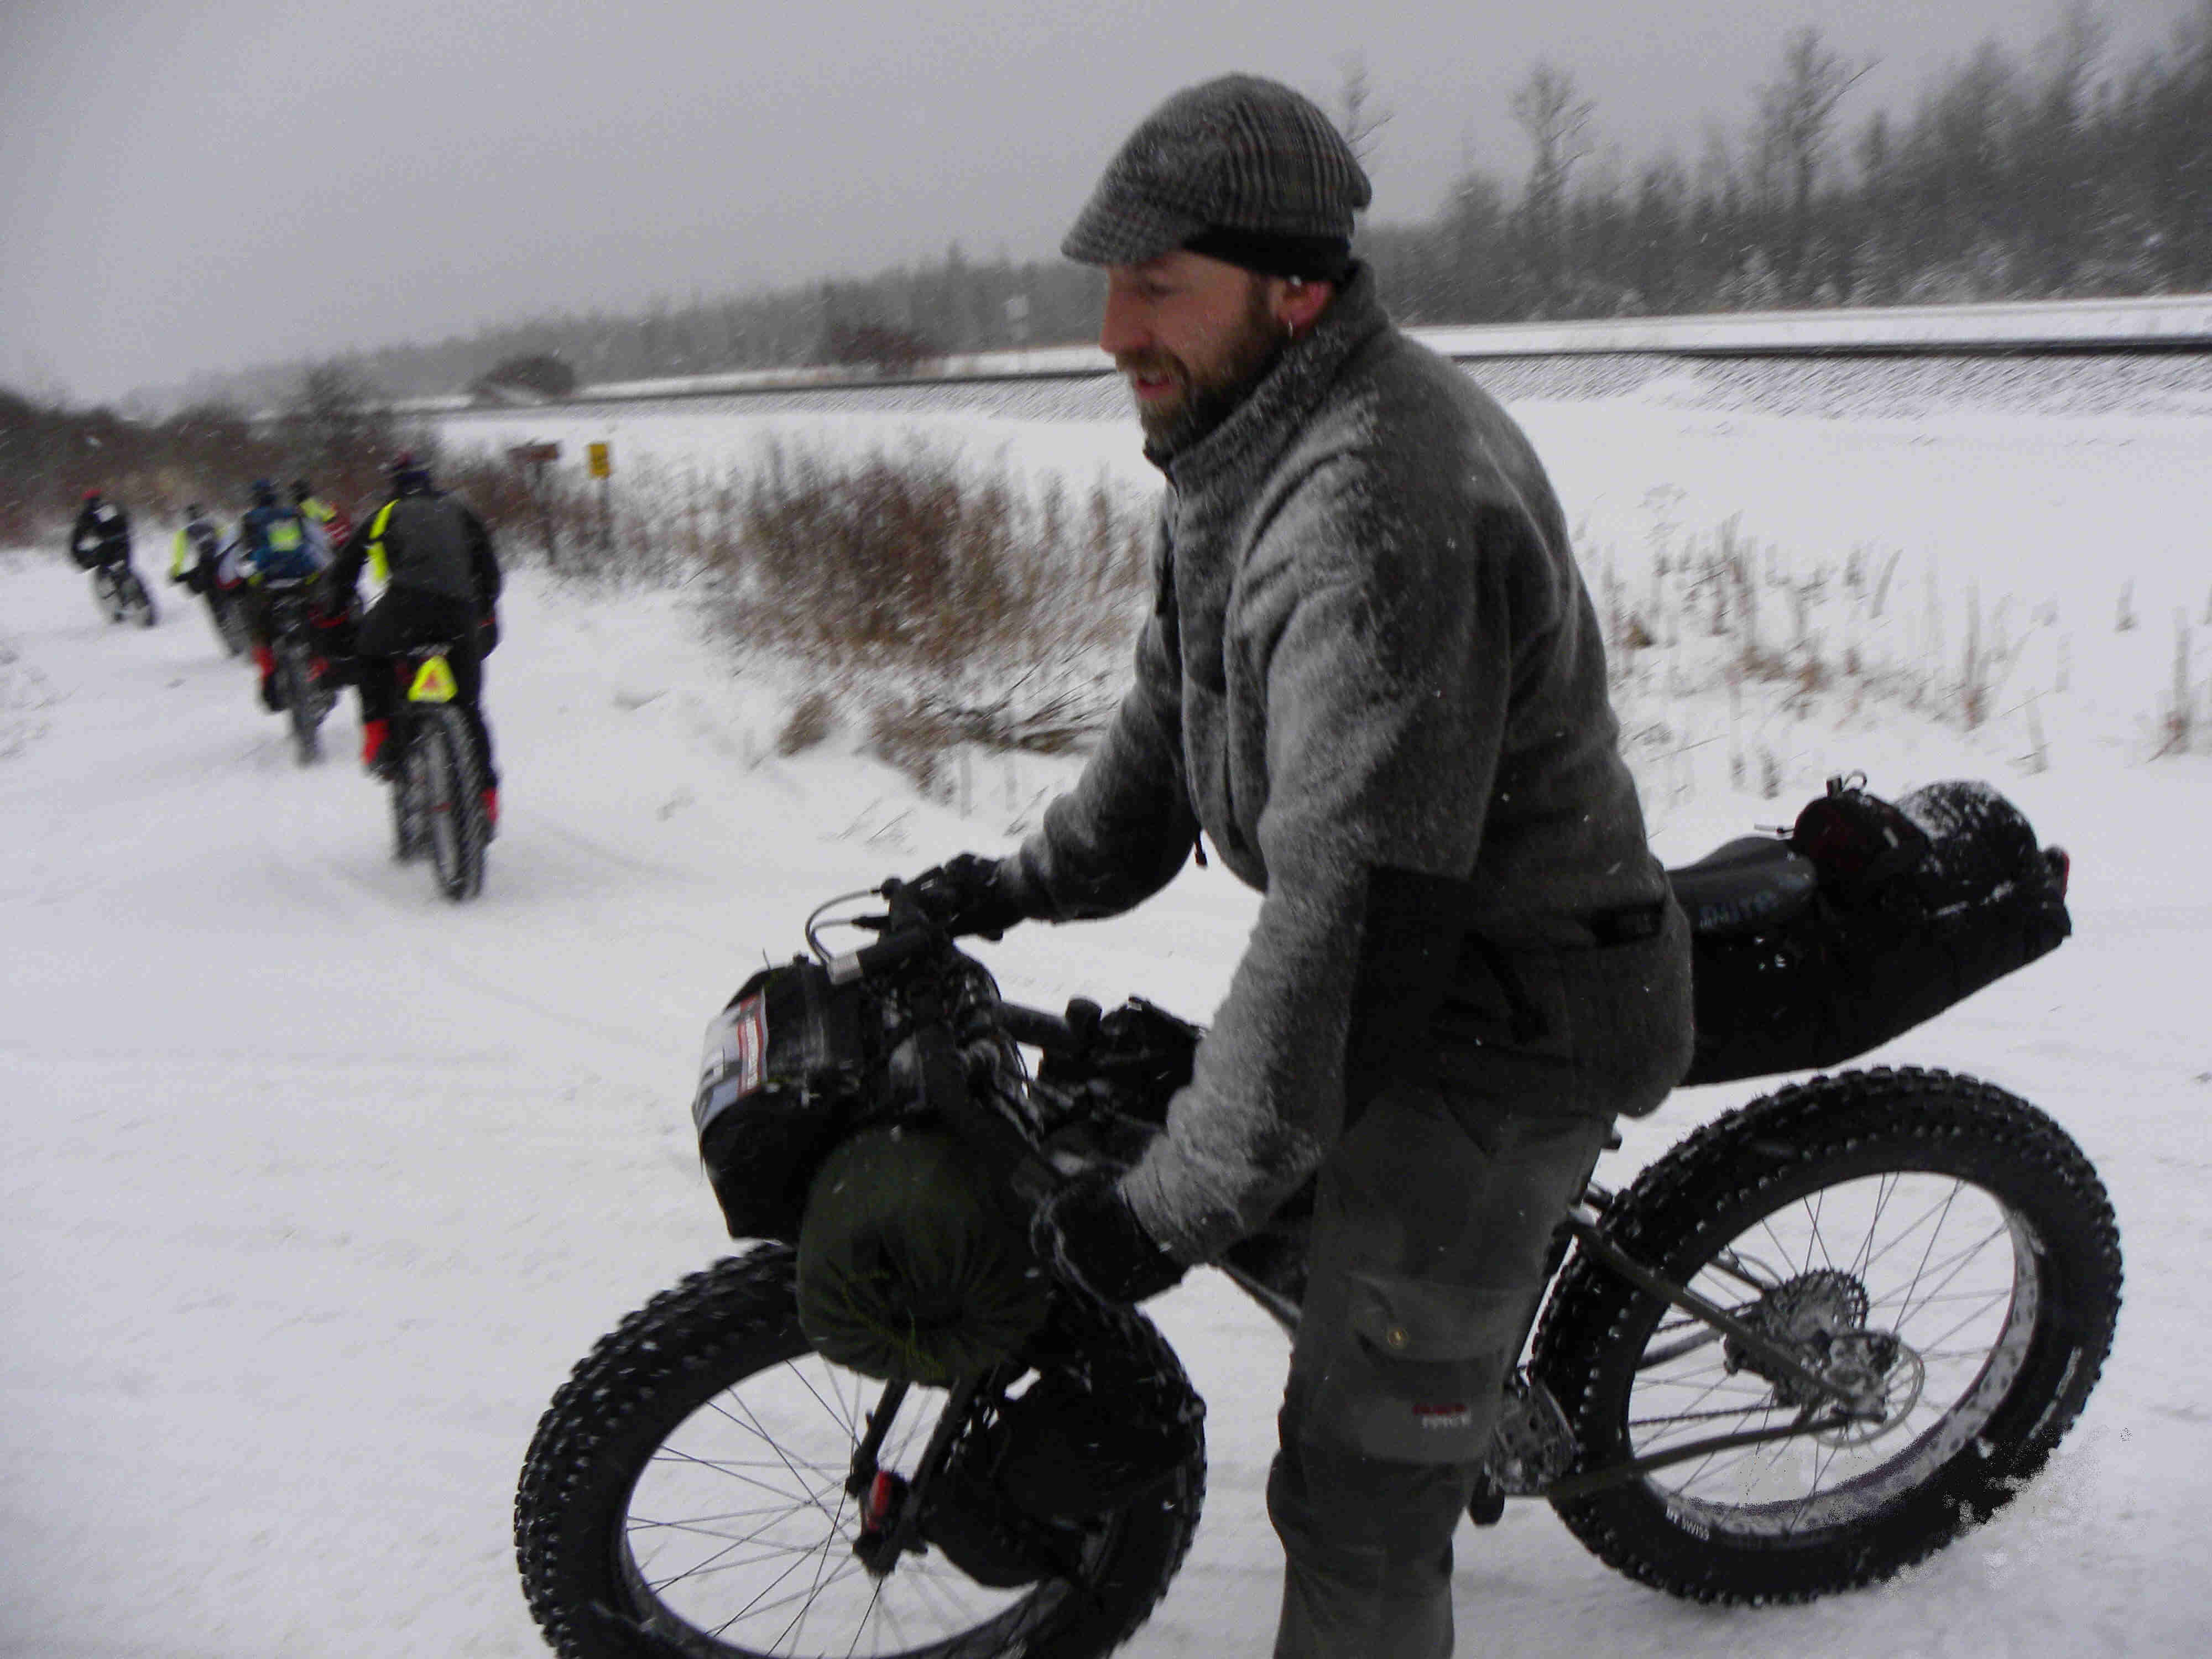 Left side view of a cyclist wearing winter outerwear, on a Surly fat bike with gear, parked across a snowy trail